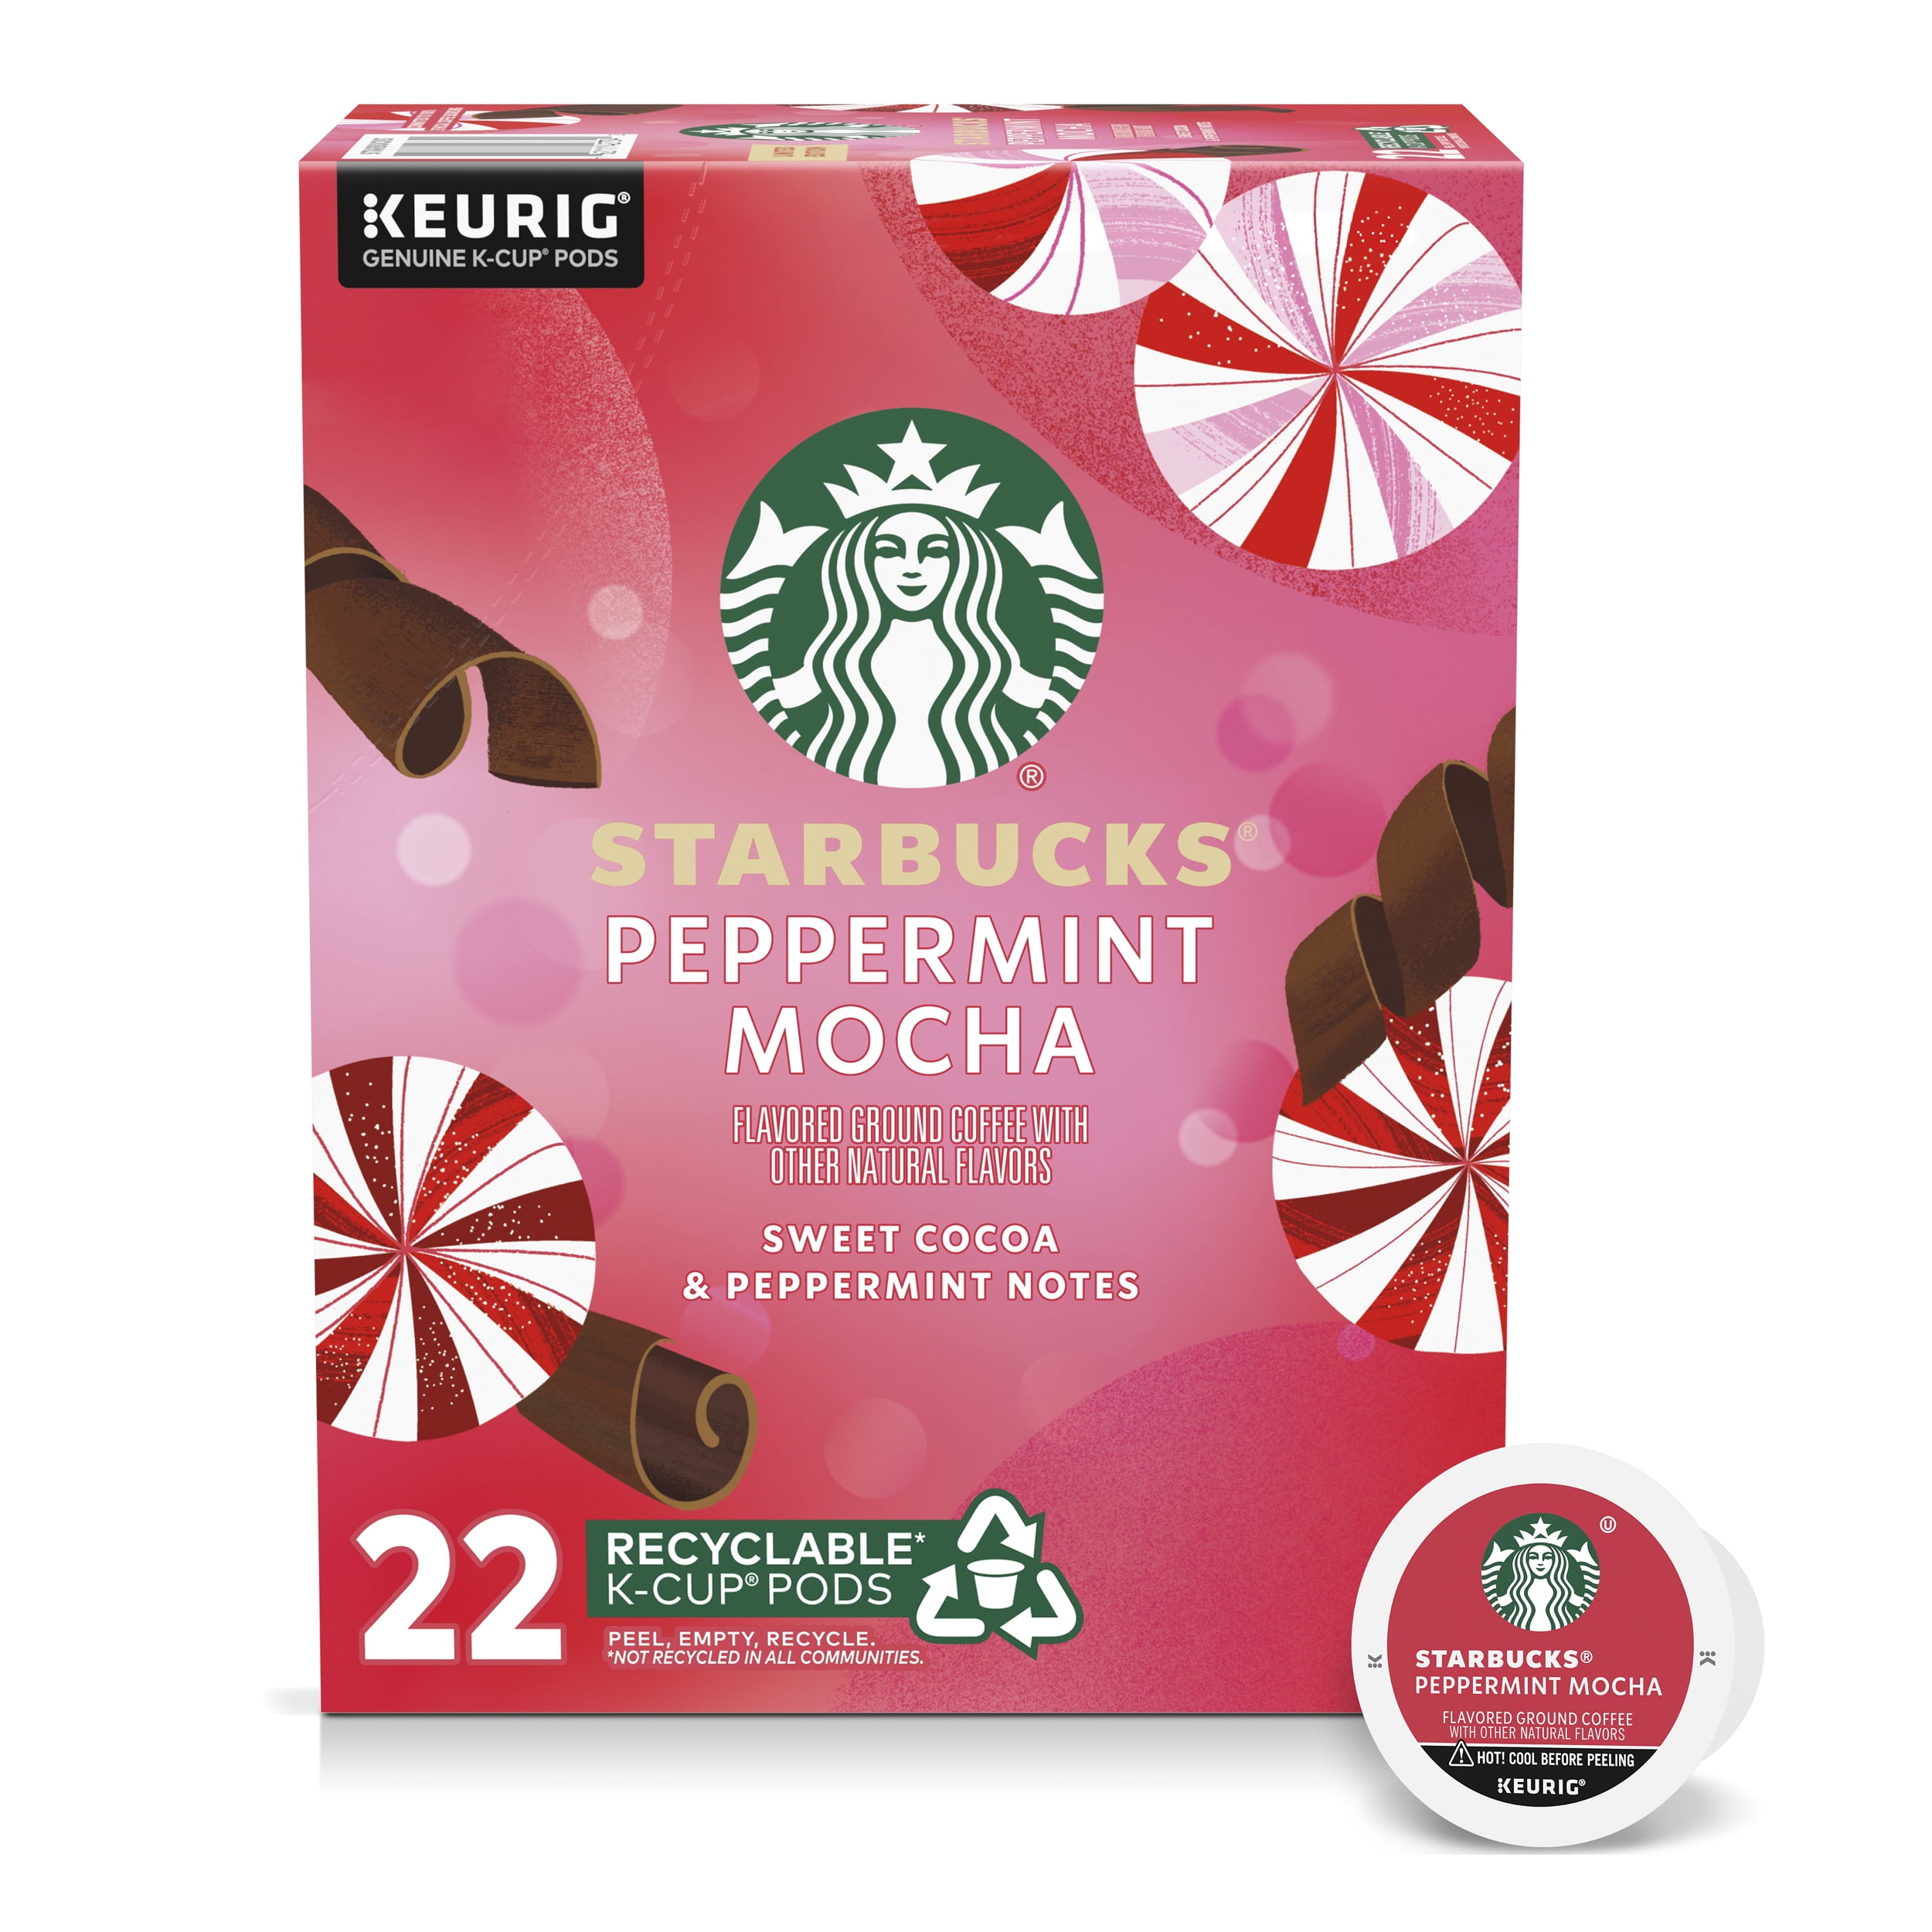 Starbucks Peppermint Mocha, Flavored K-Cup Coffee Pods, 100% Arabica, Naturally Flavored, Limited Edition, 22 ct